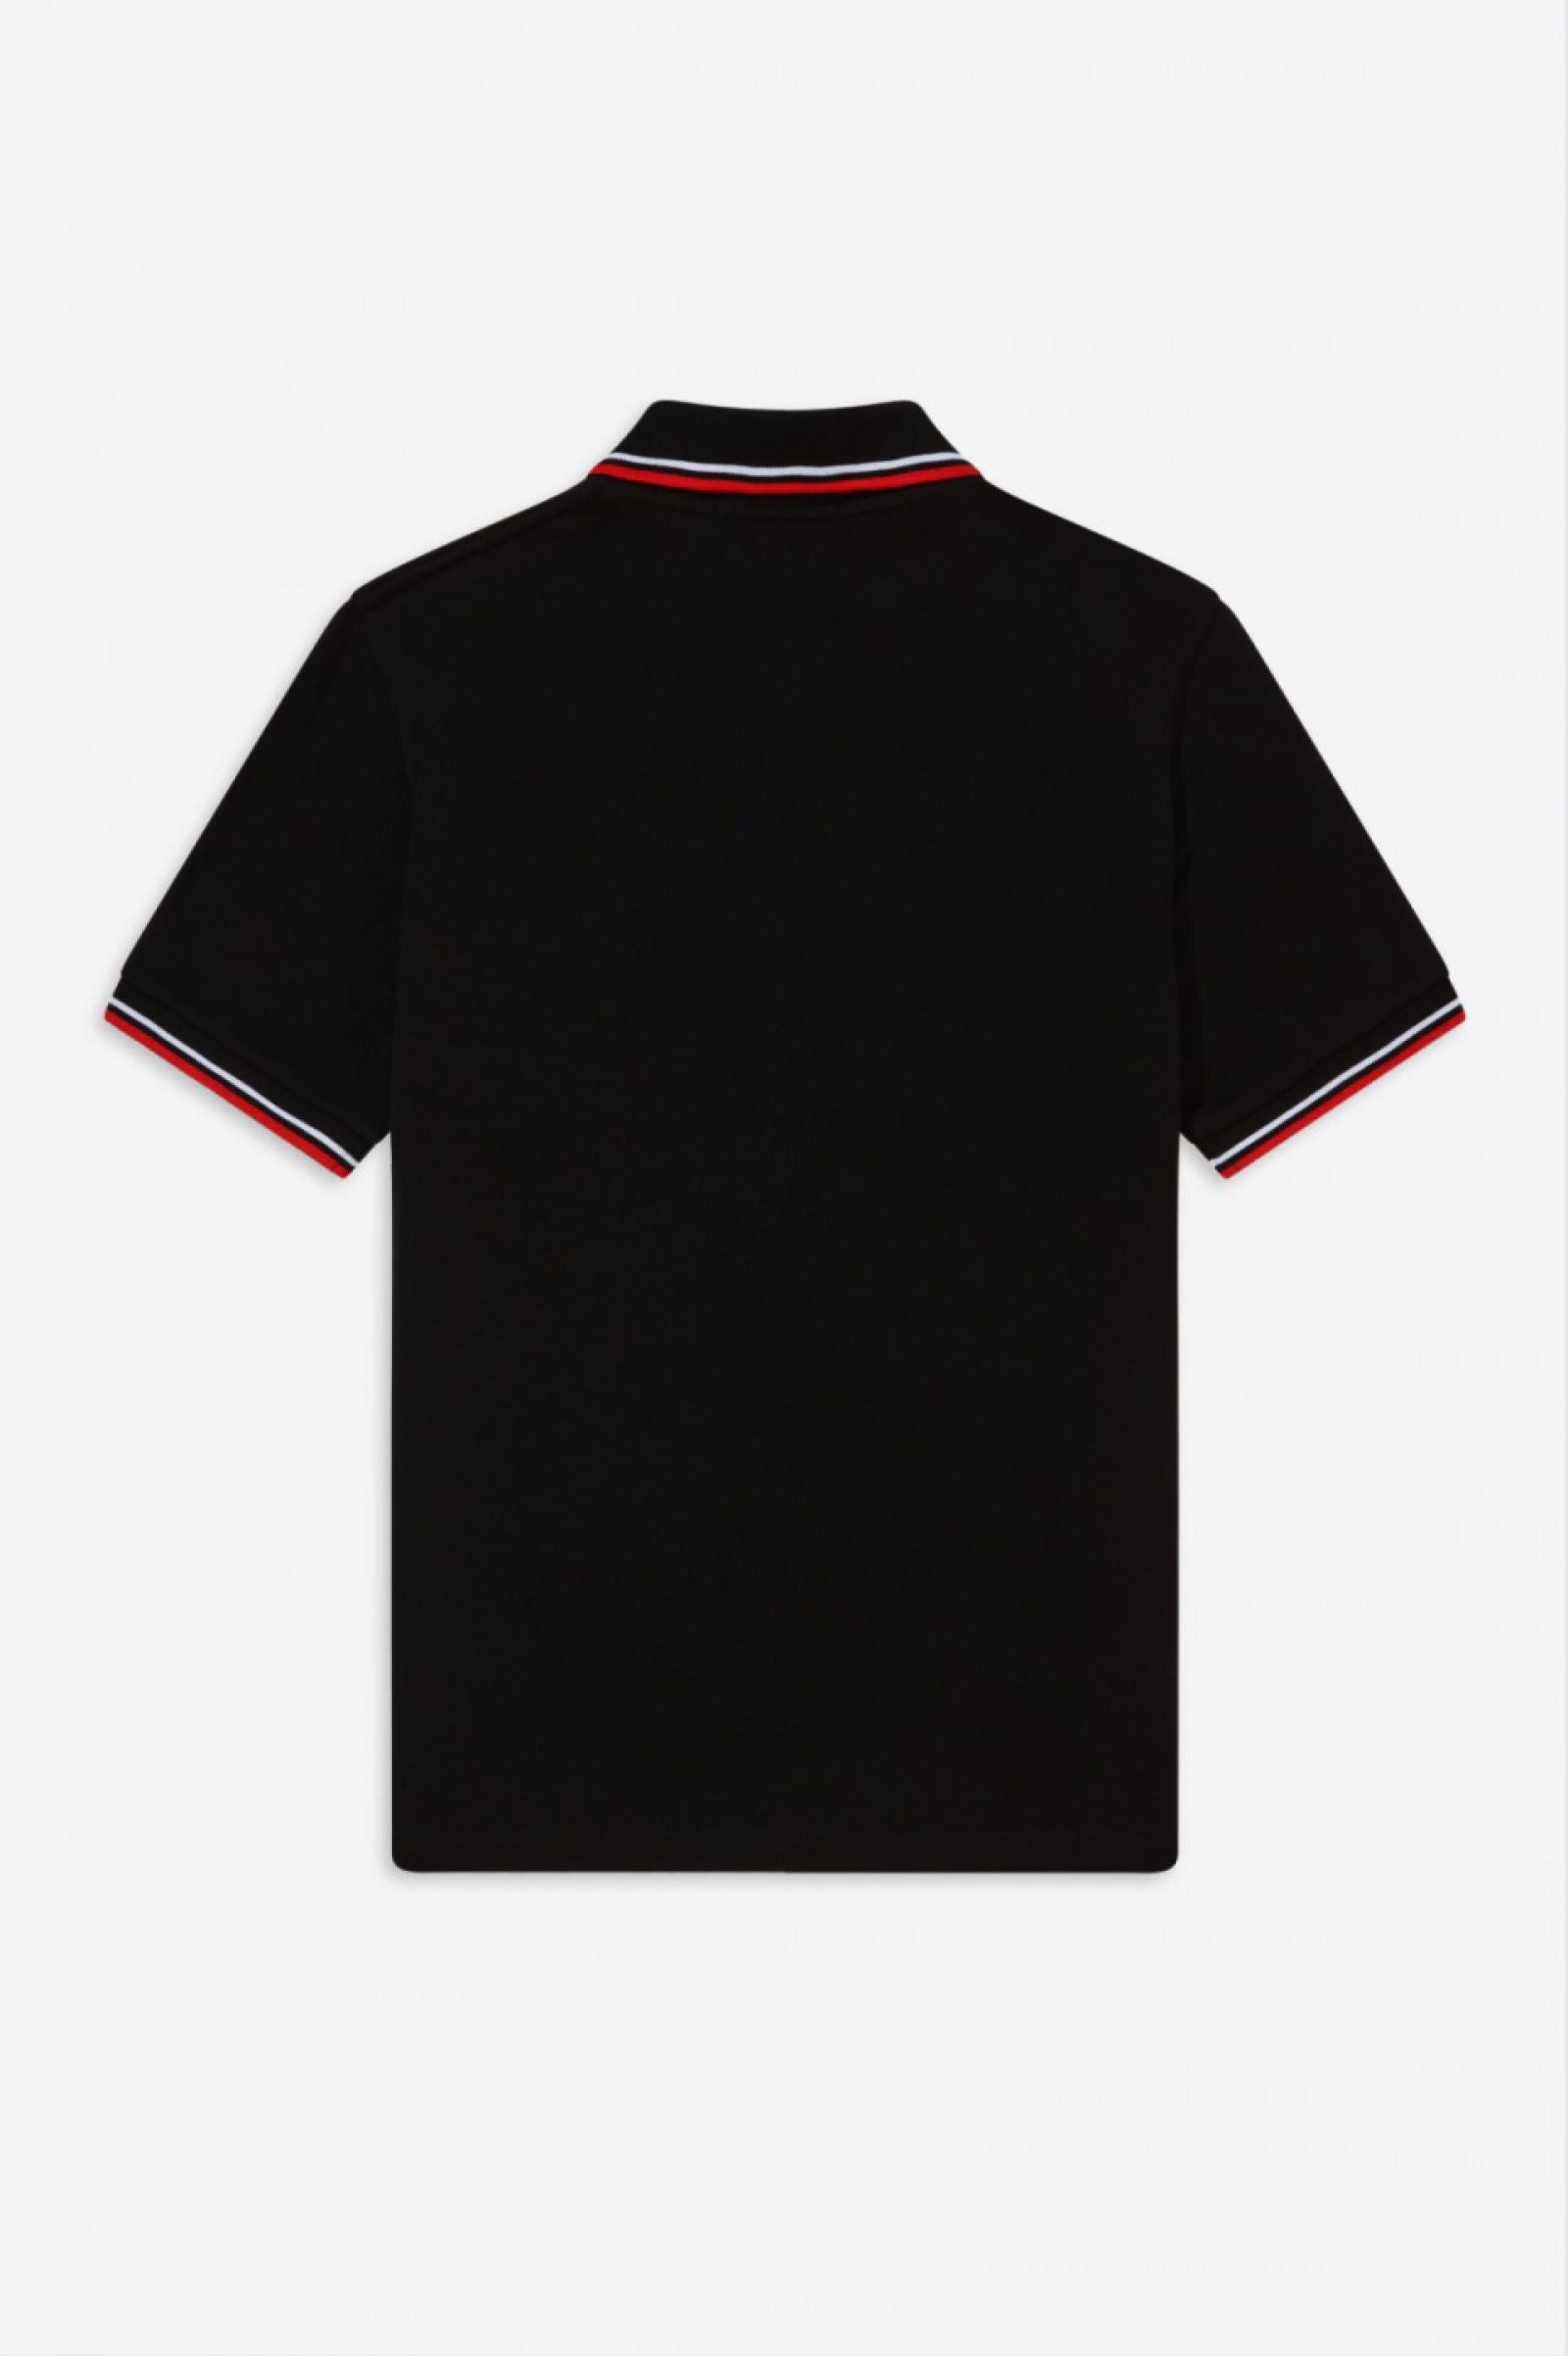 M12 TWIN TIPPED FRED PERRY SHIRT